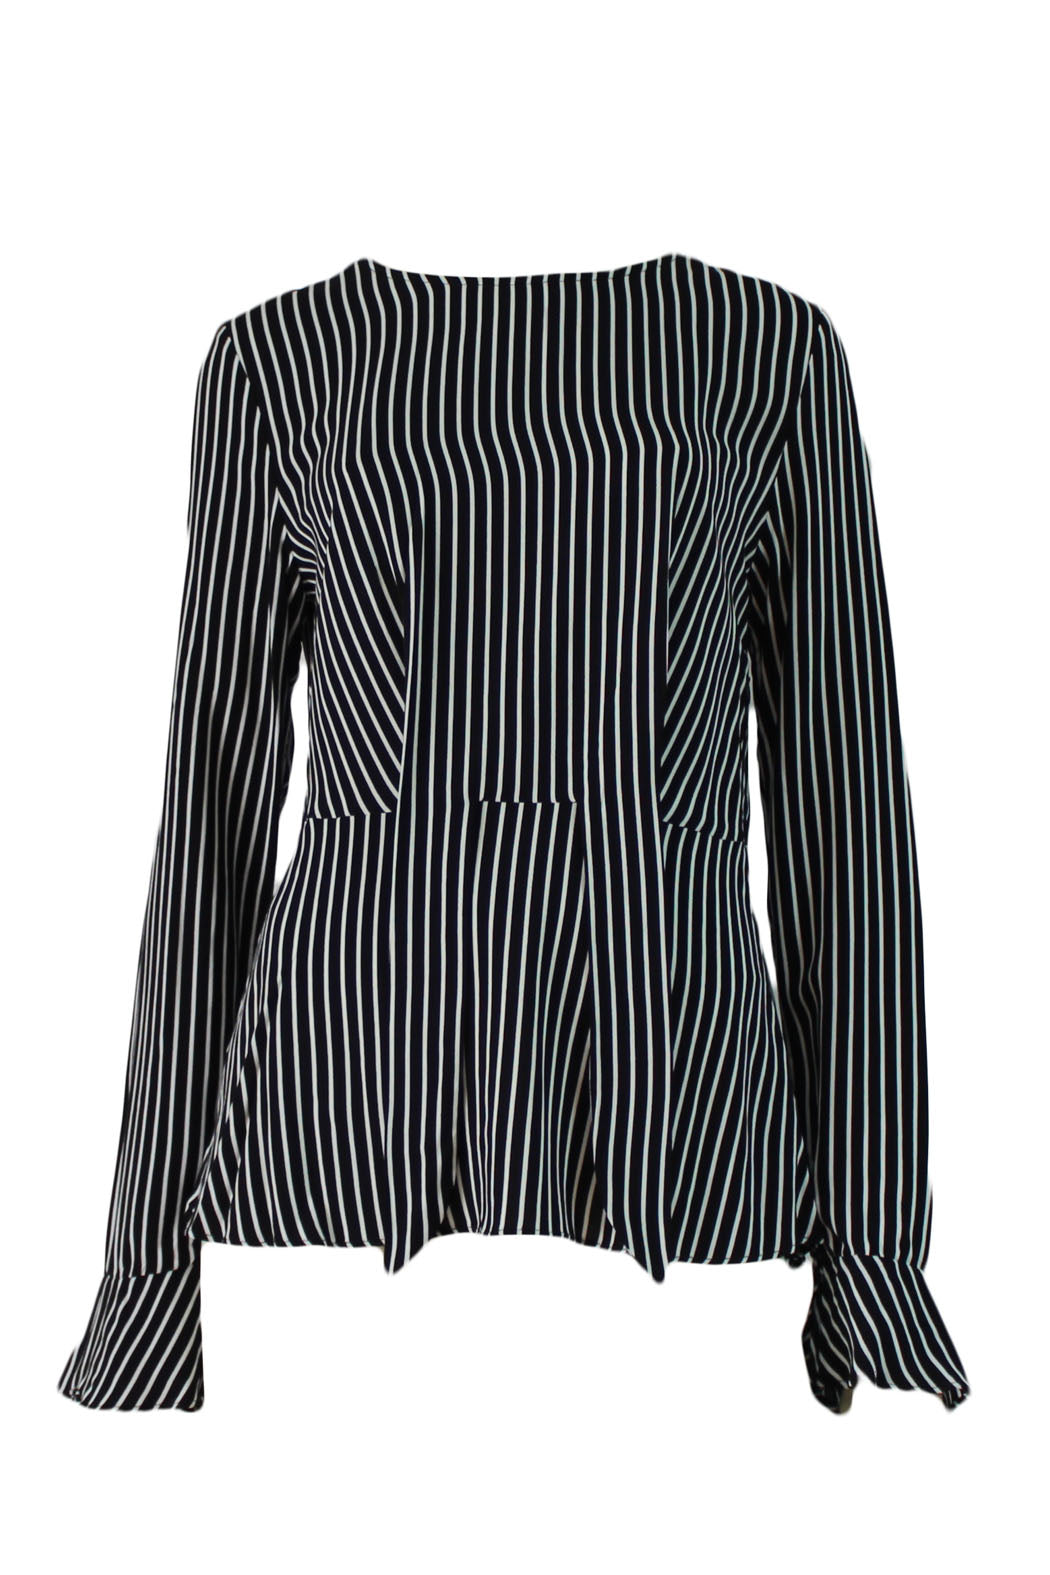 Long sleeve top, striped blouse, tie detail